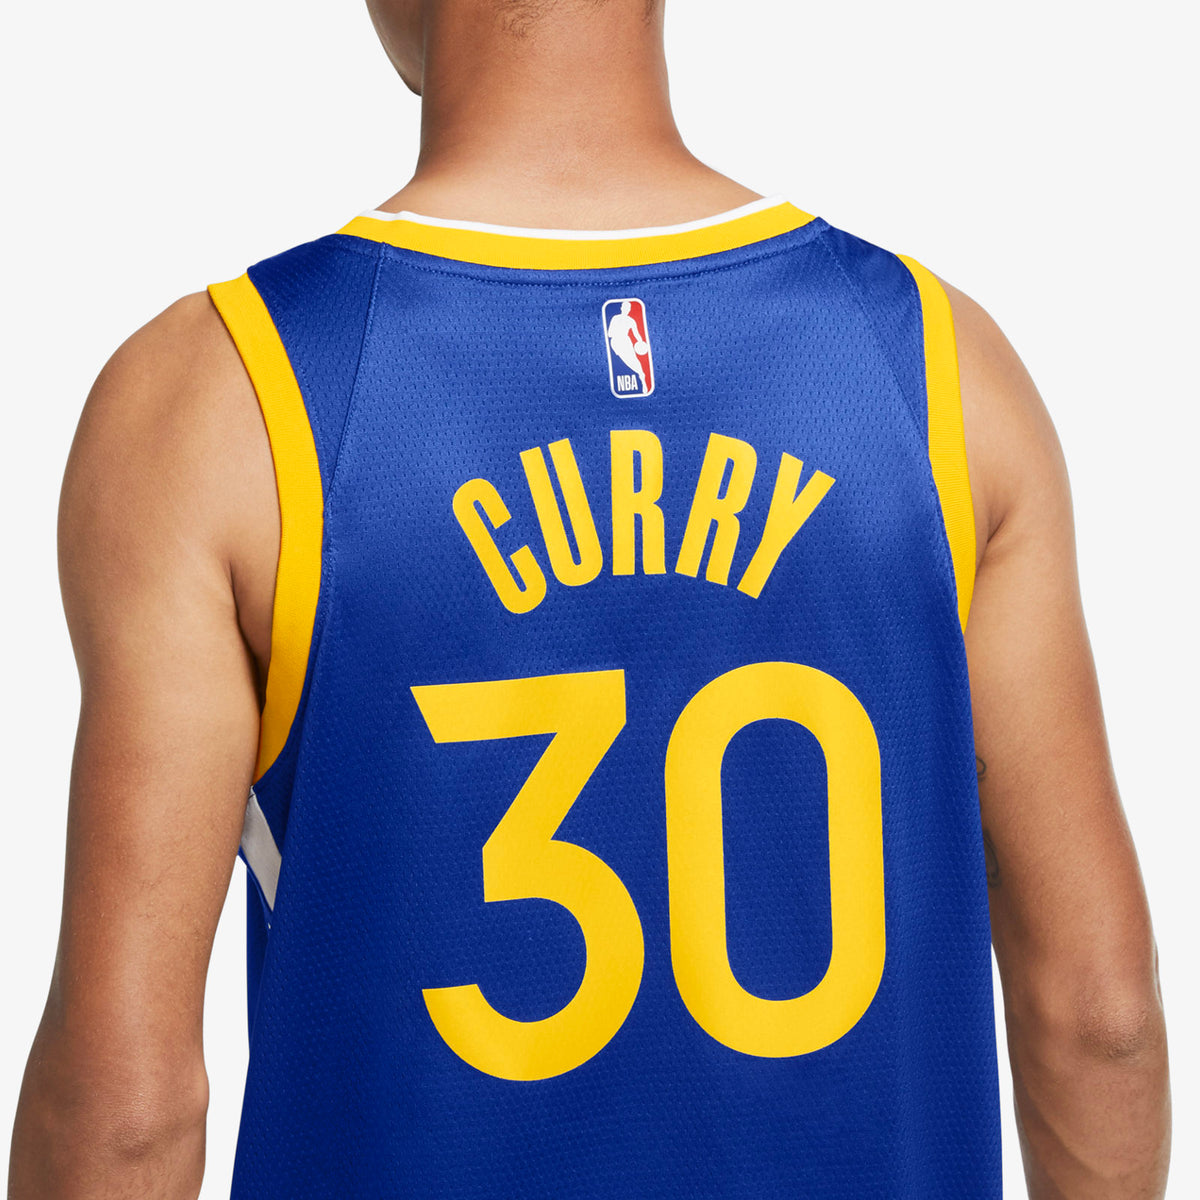 Stephen Curry Golden State Warriors Nike Authentic Jersey Royal - Icon  Edition